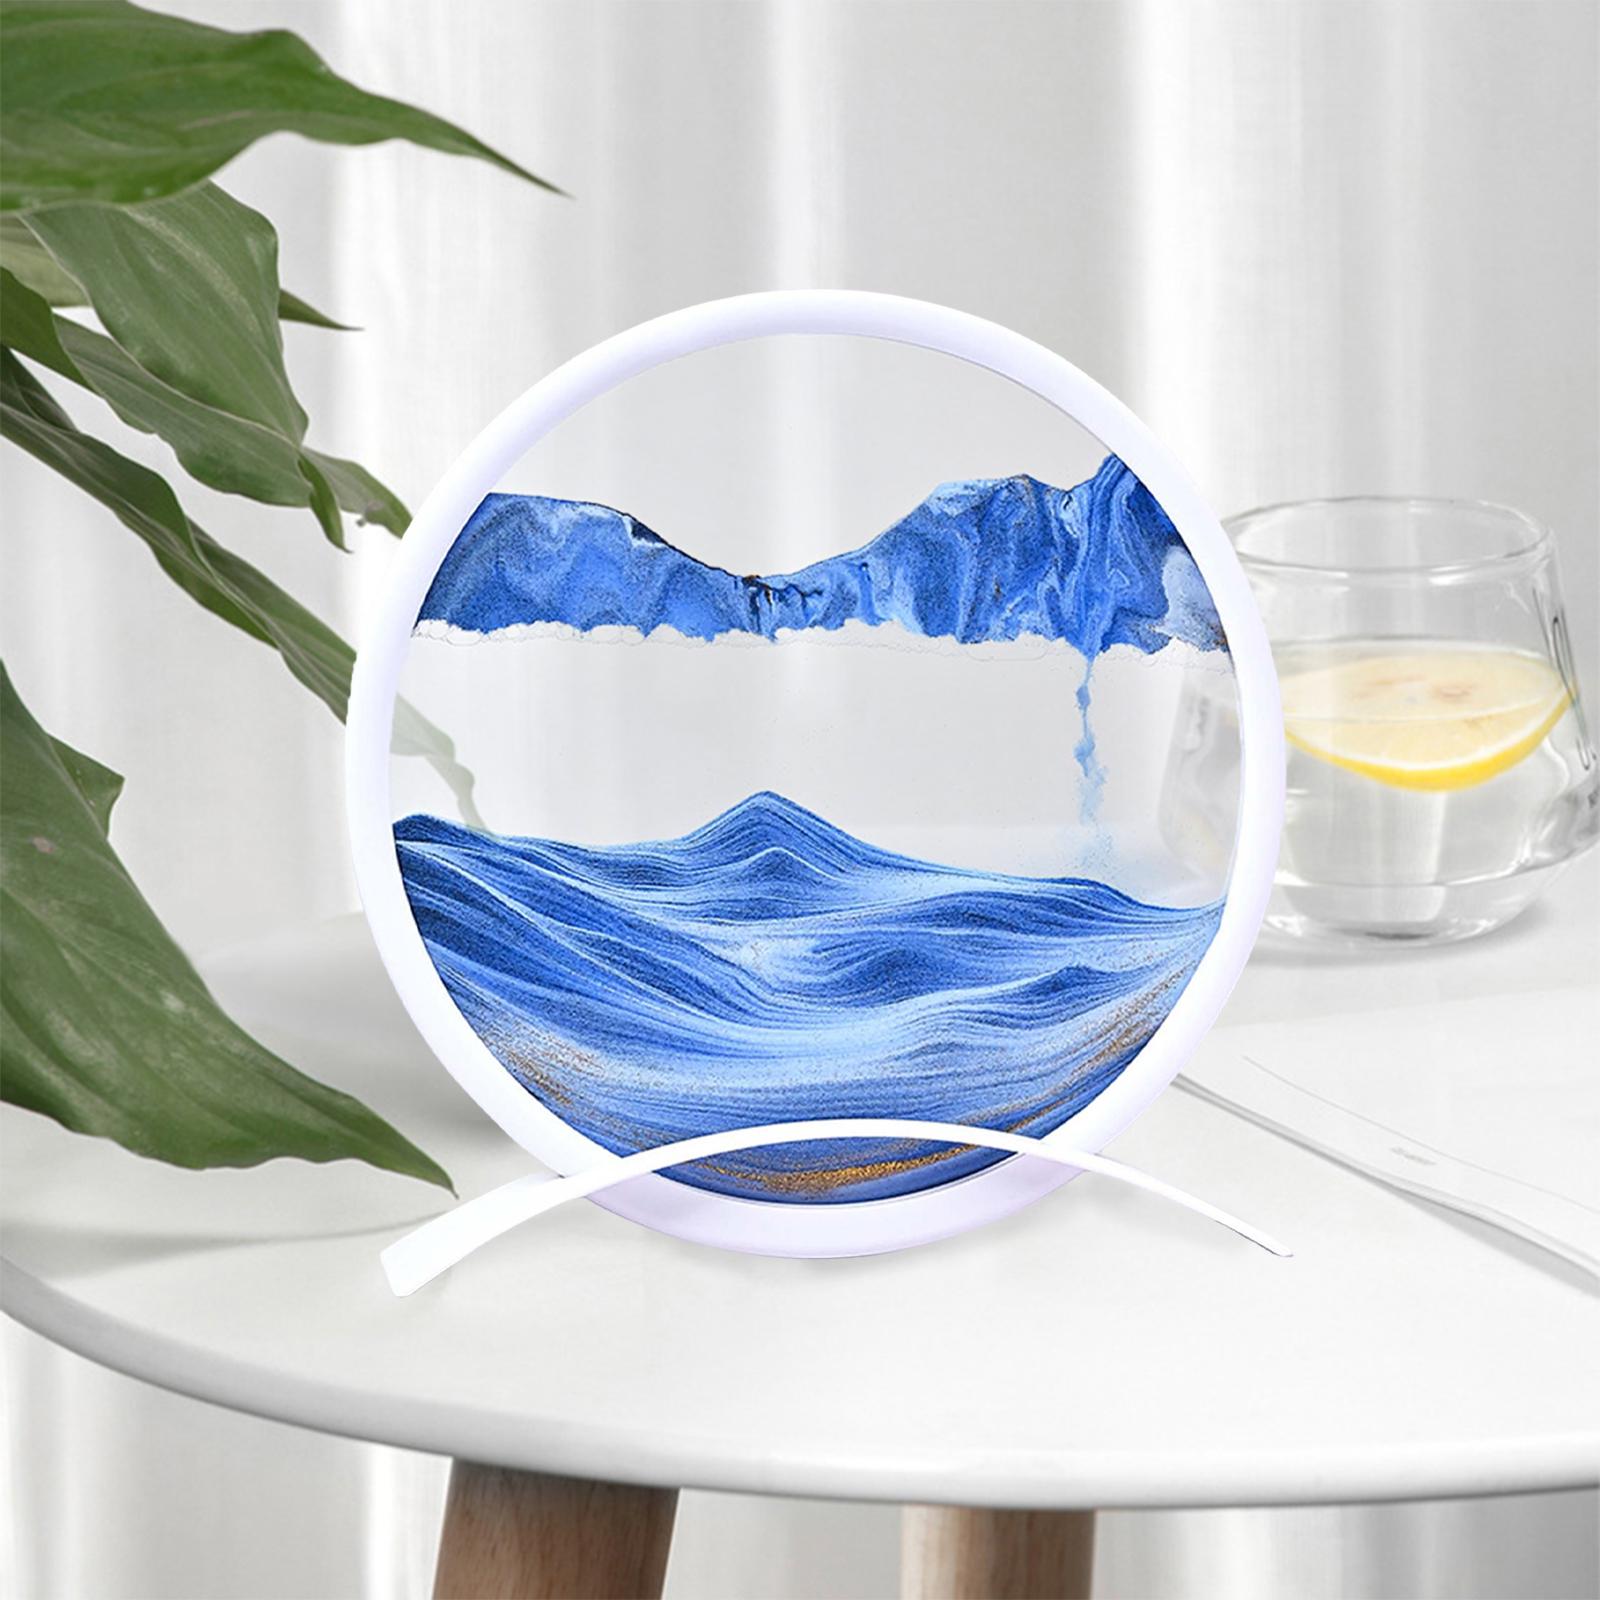 Artistic Moving Sand Picture Dynamic Display 3D Hourglass Creative Landscape Blue